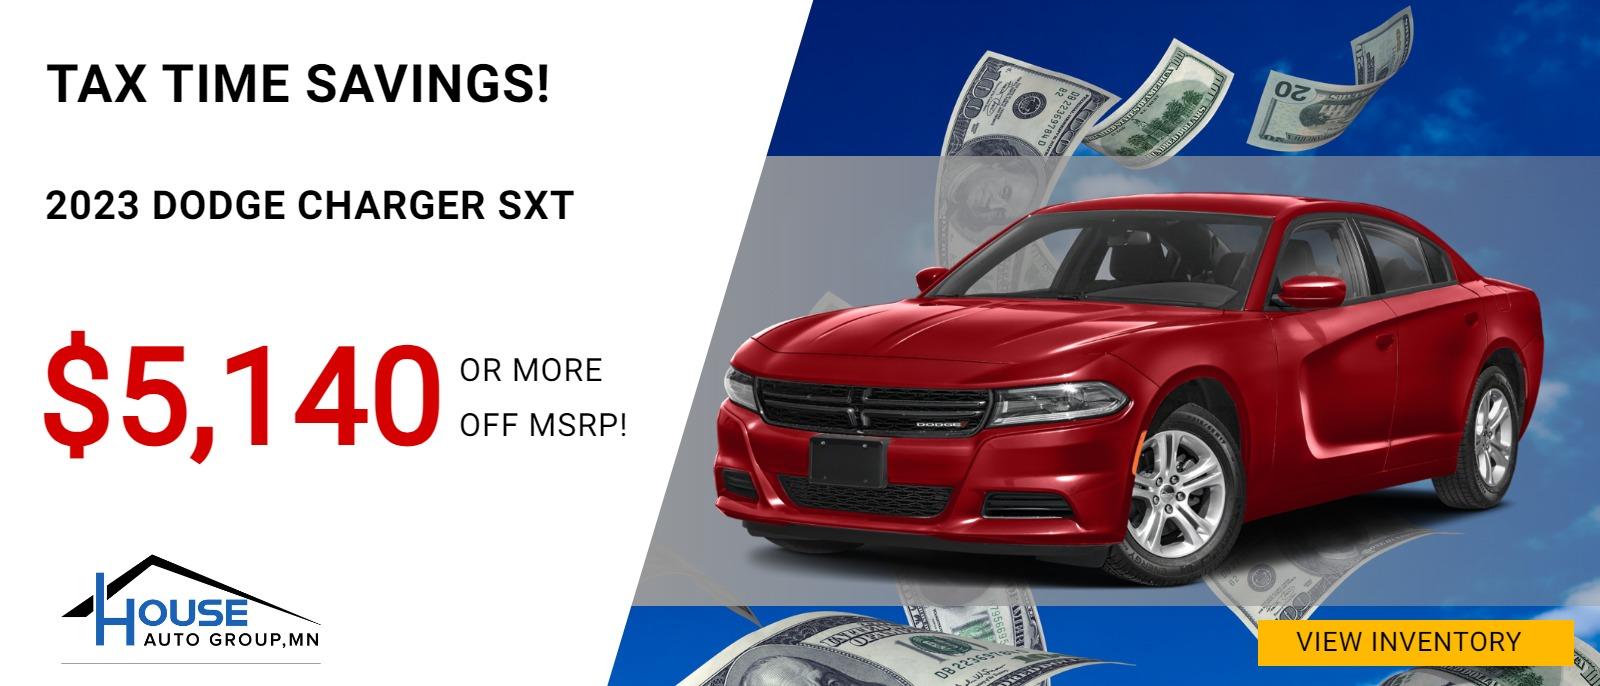 TAX TIME SAVINGS!
2023 Dodge Charger SXT -- $5,140 Or More Off MSRP!